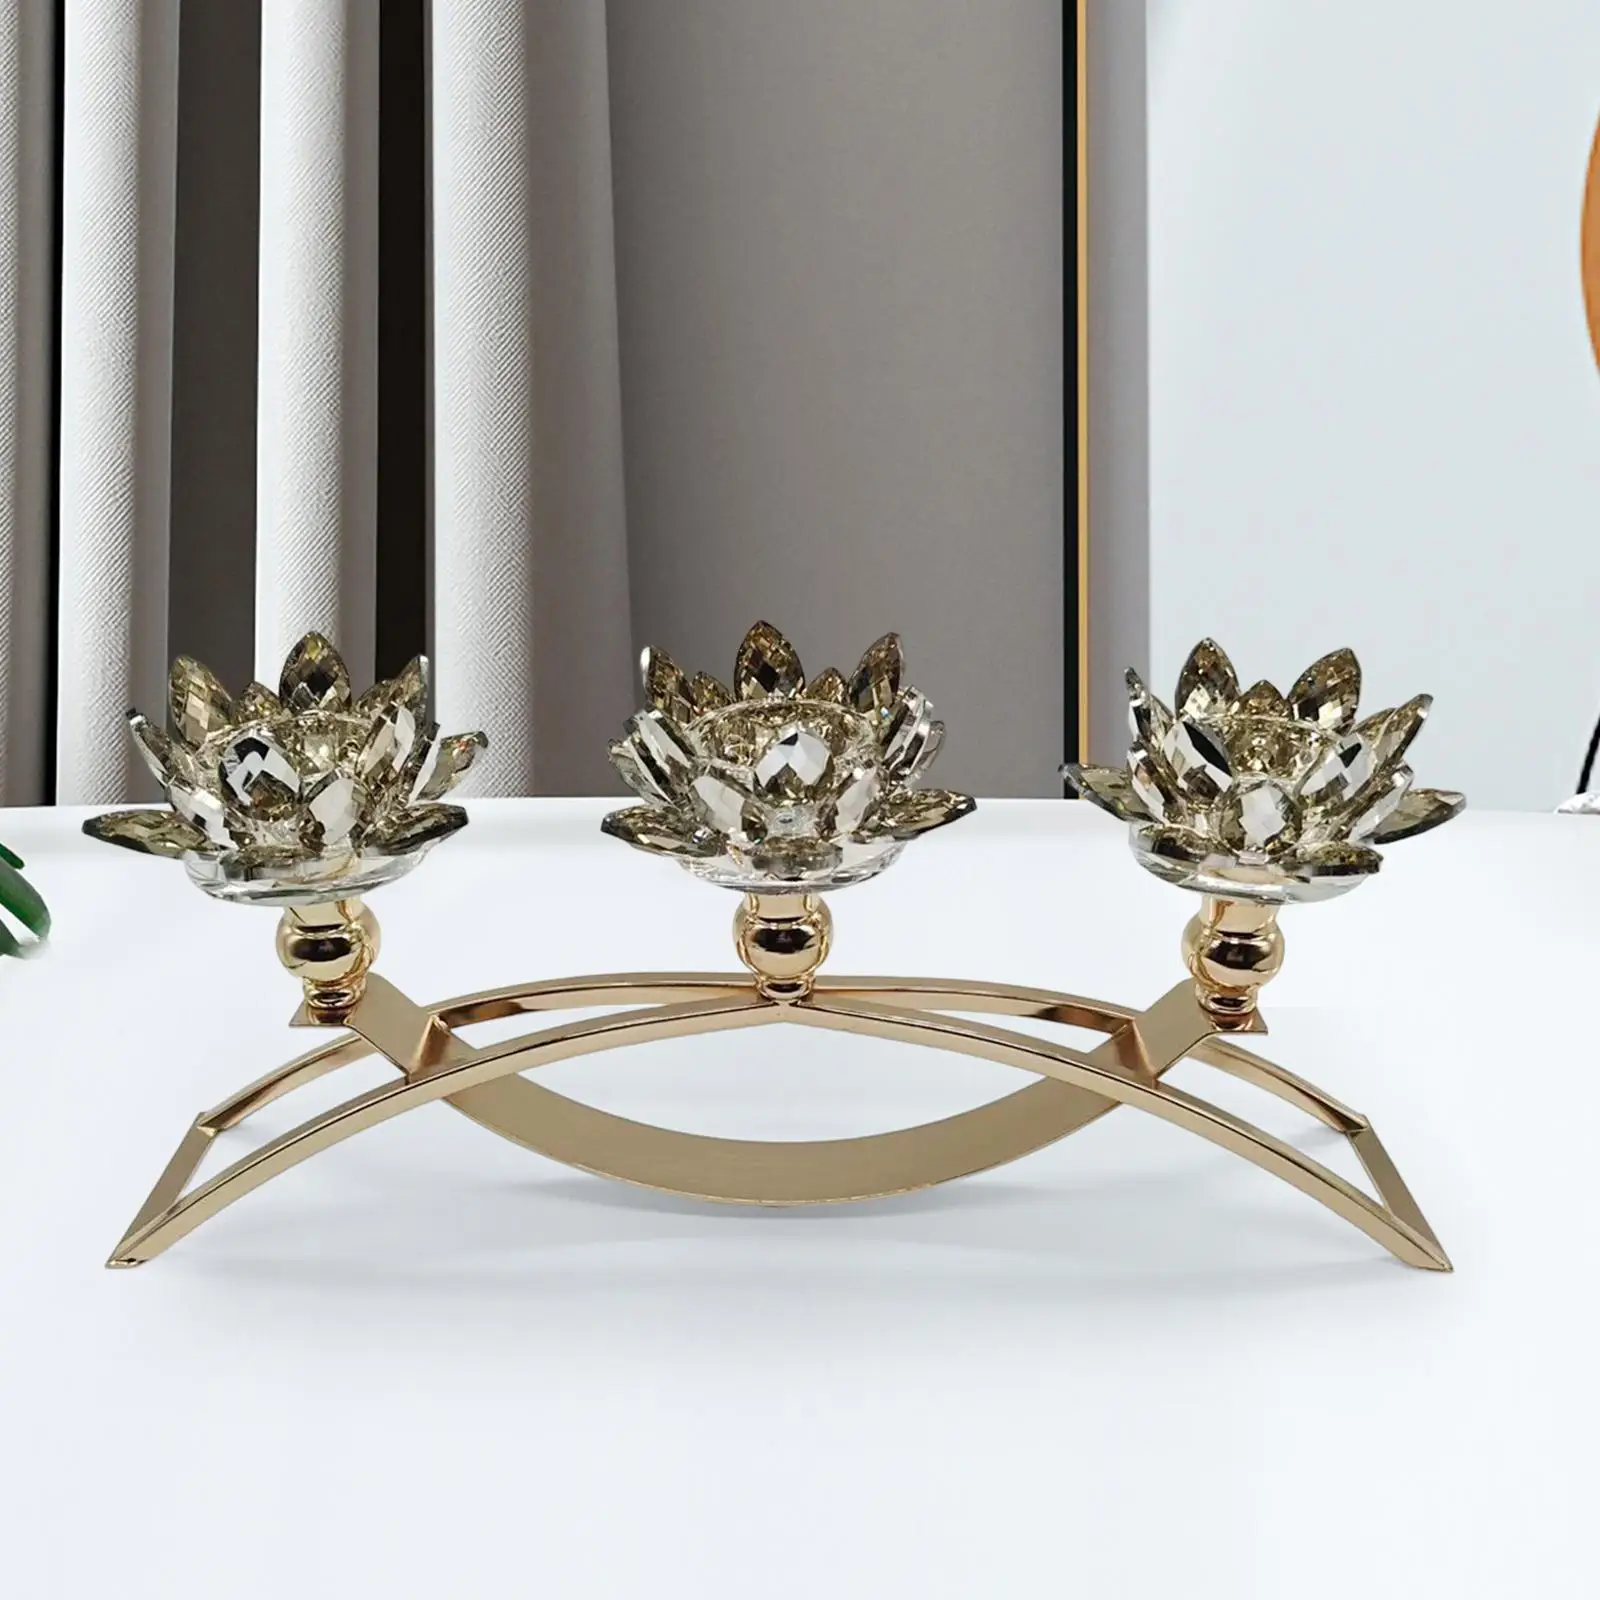 Decorative Candlestick Holders Candle Stand Candelabra European Style Tealight Holder for Graduation Ceremony Housewarming Party